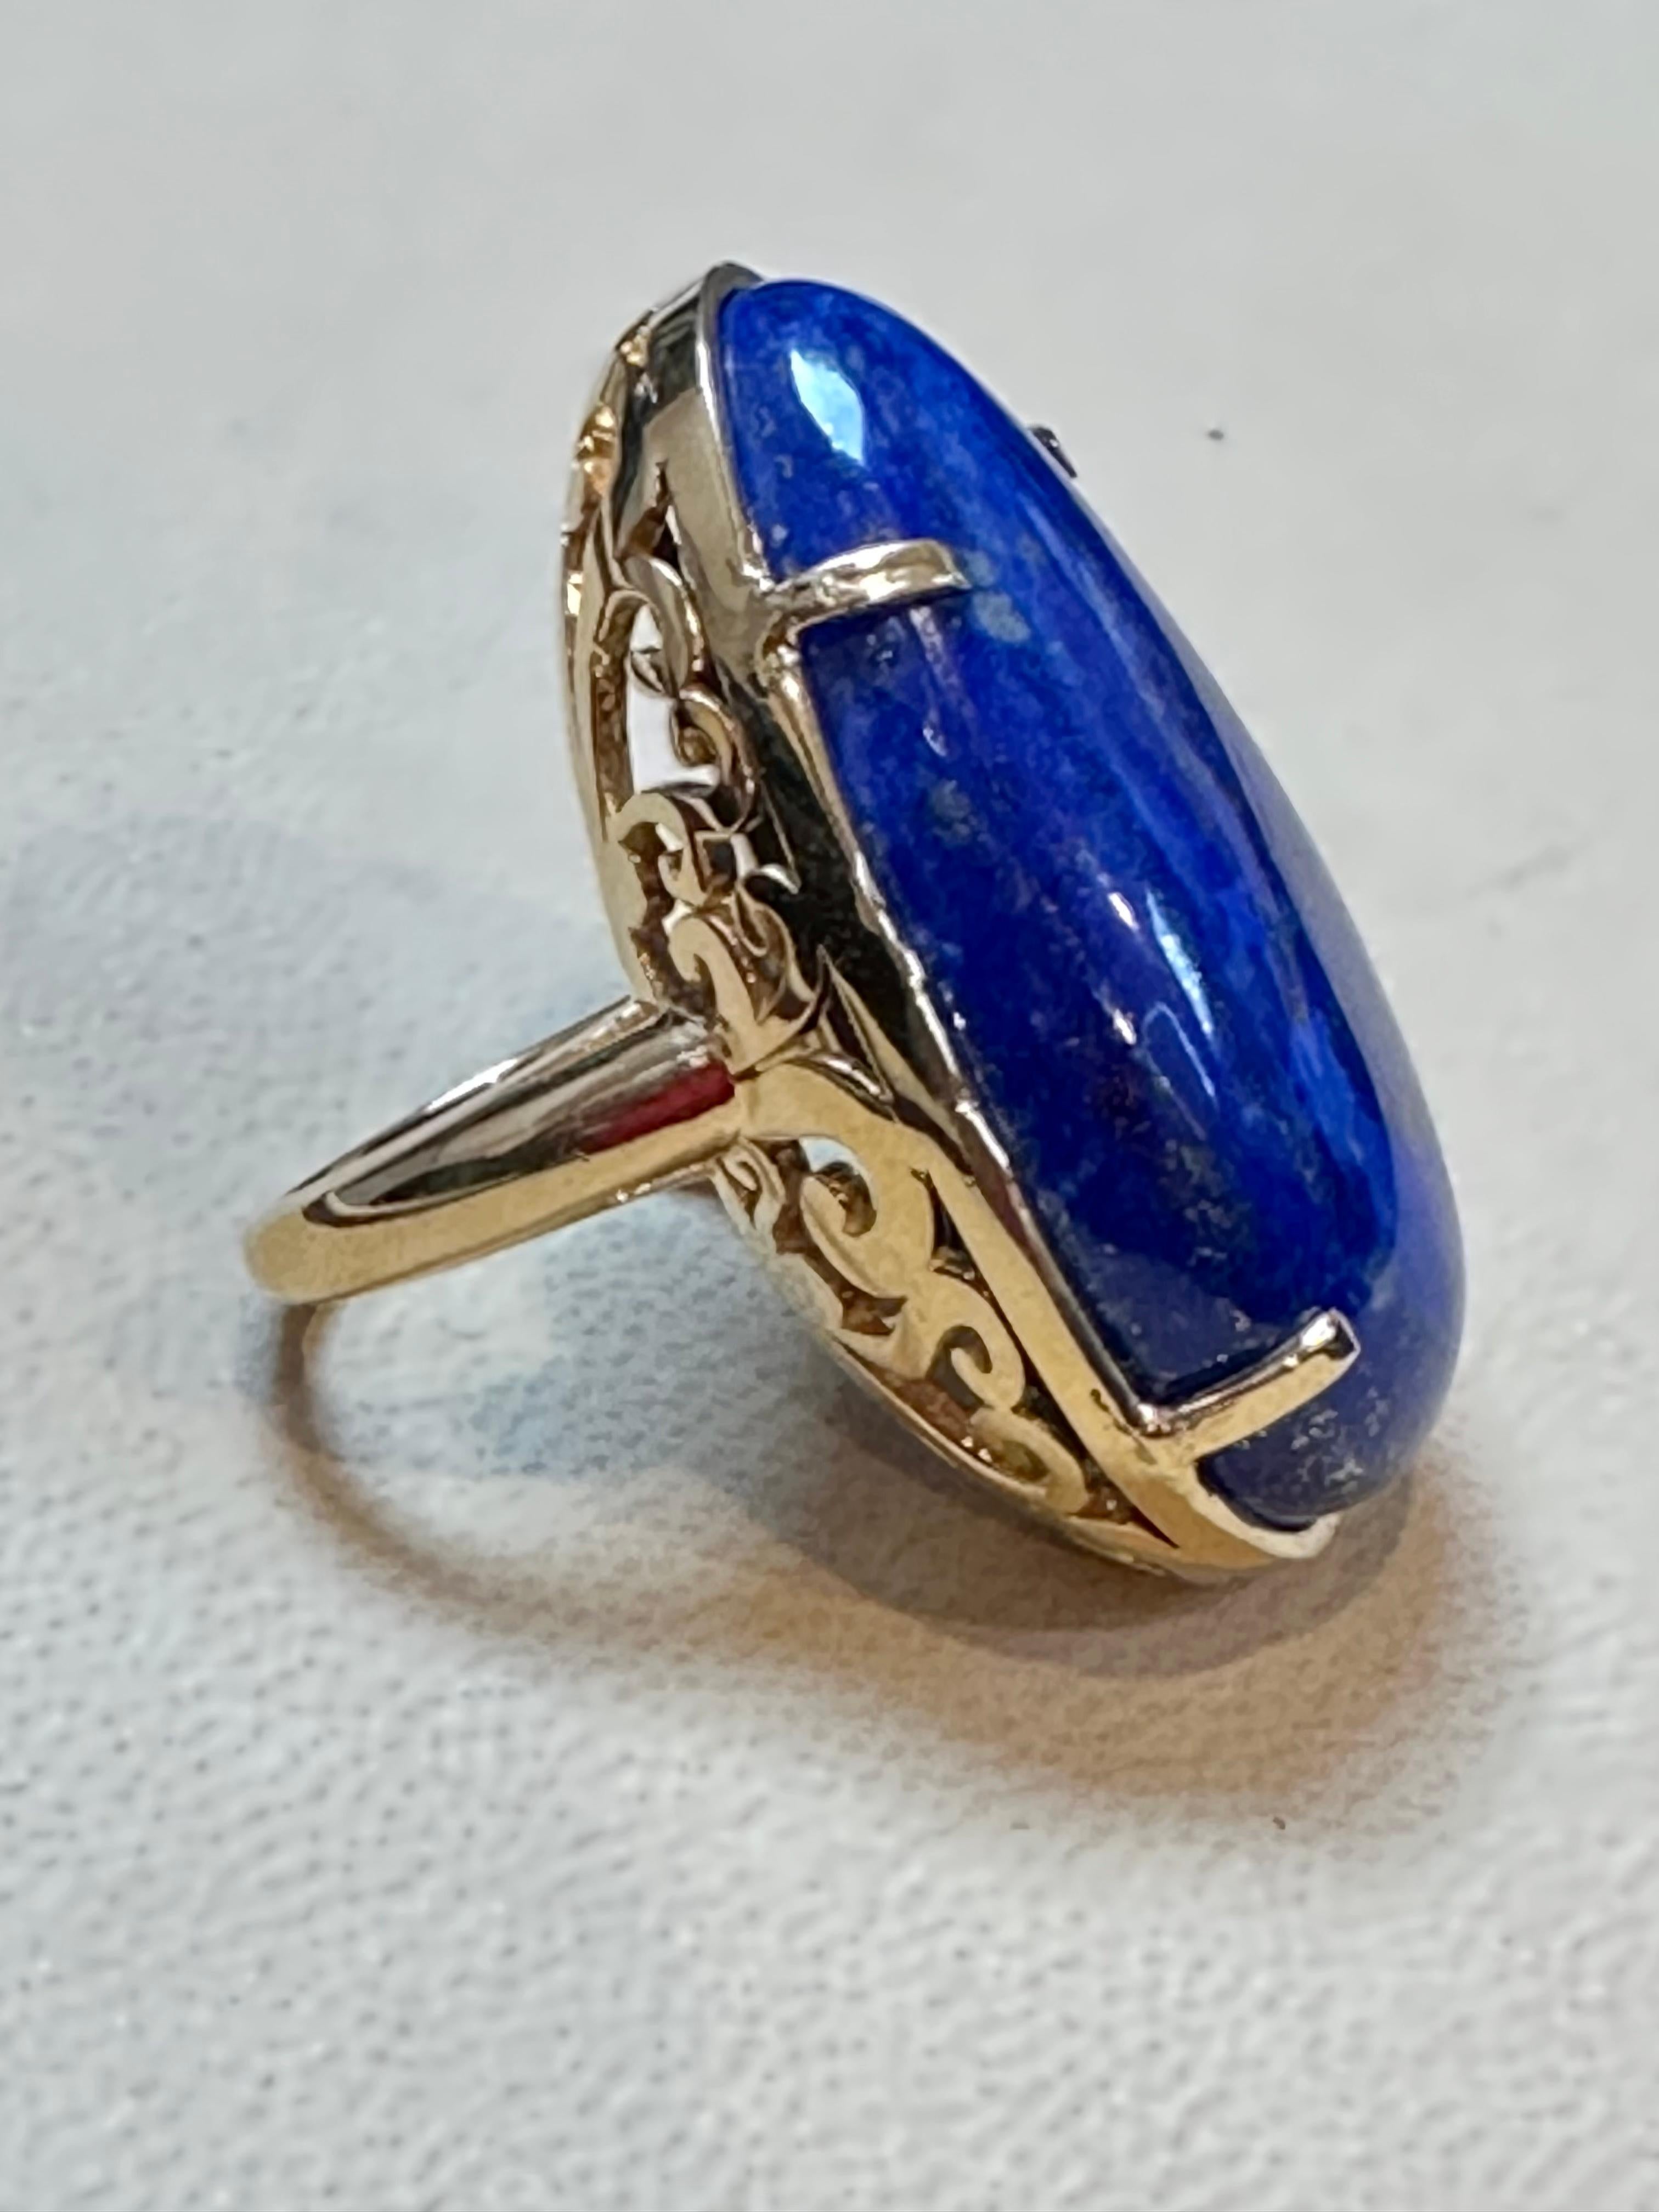 Huge 63 Ct Natural Cabochon Lapis Lazuli Ring in 14 Kt Yellow Gold, Estate For Sale 4